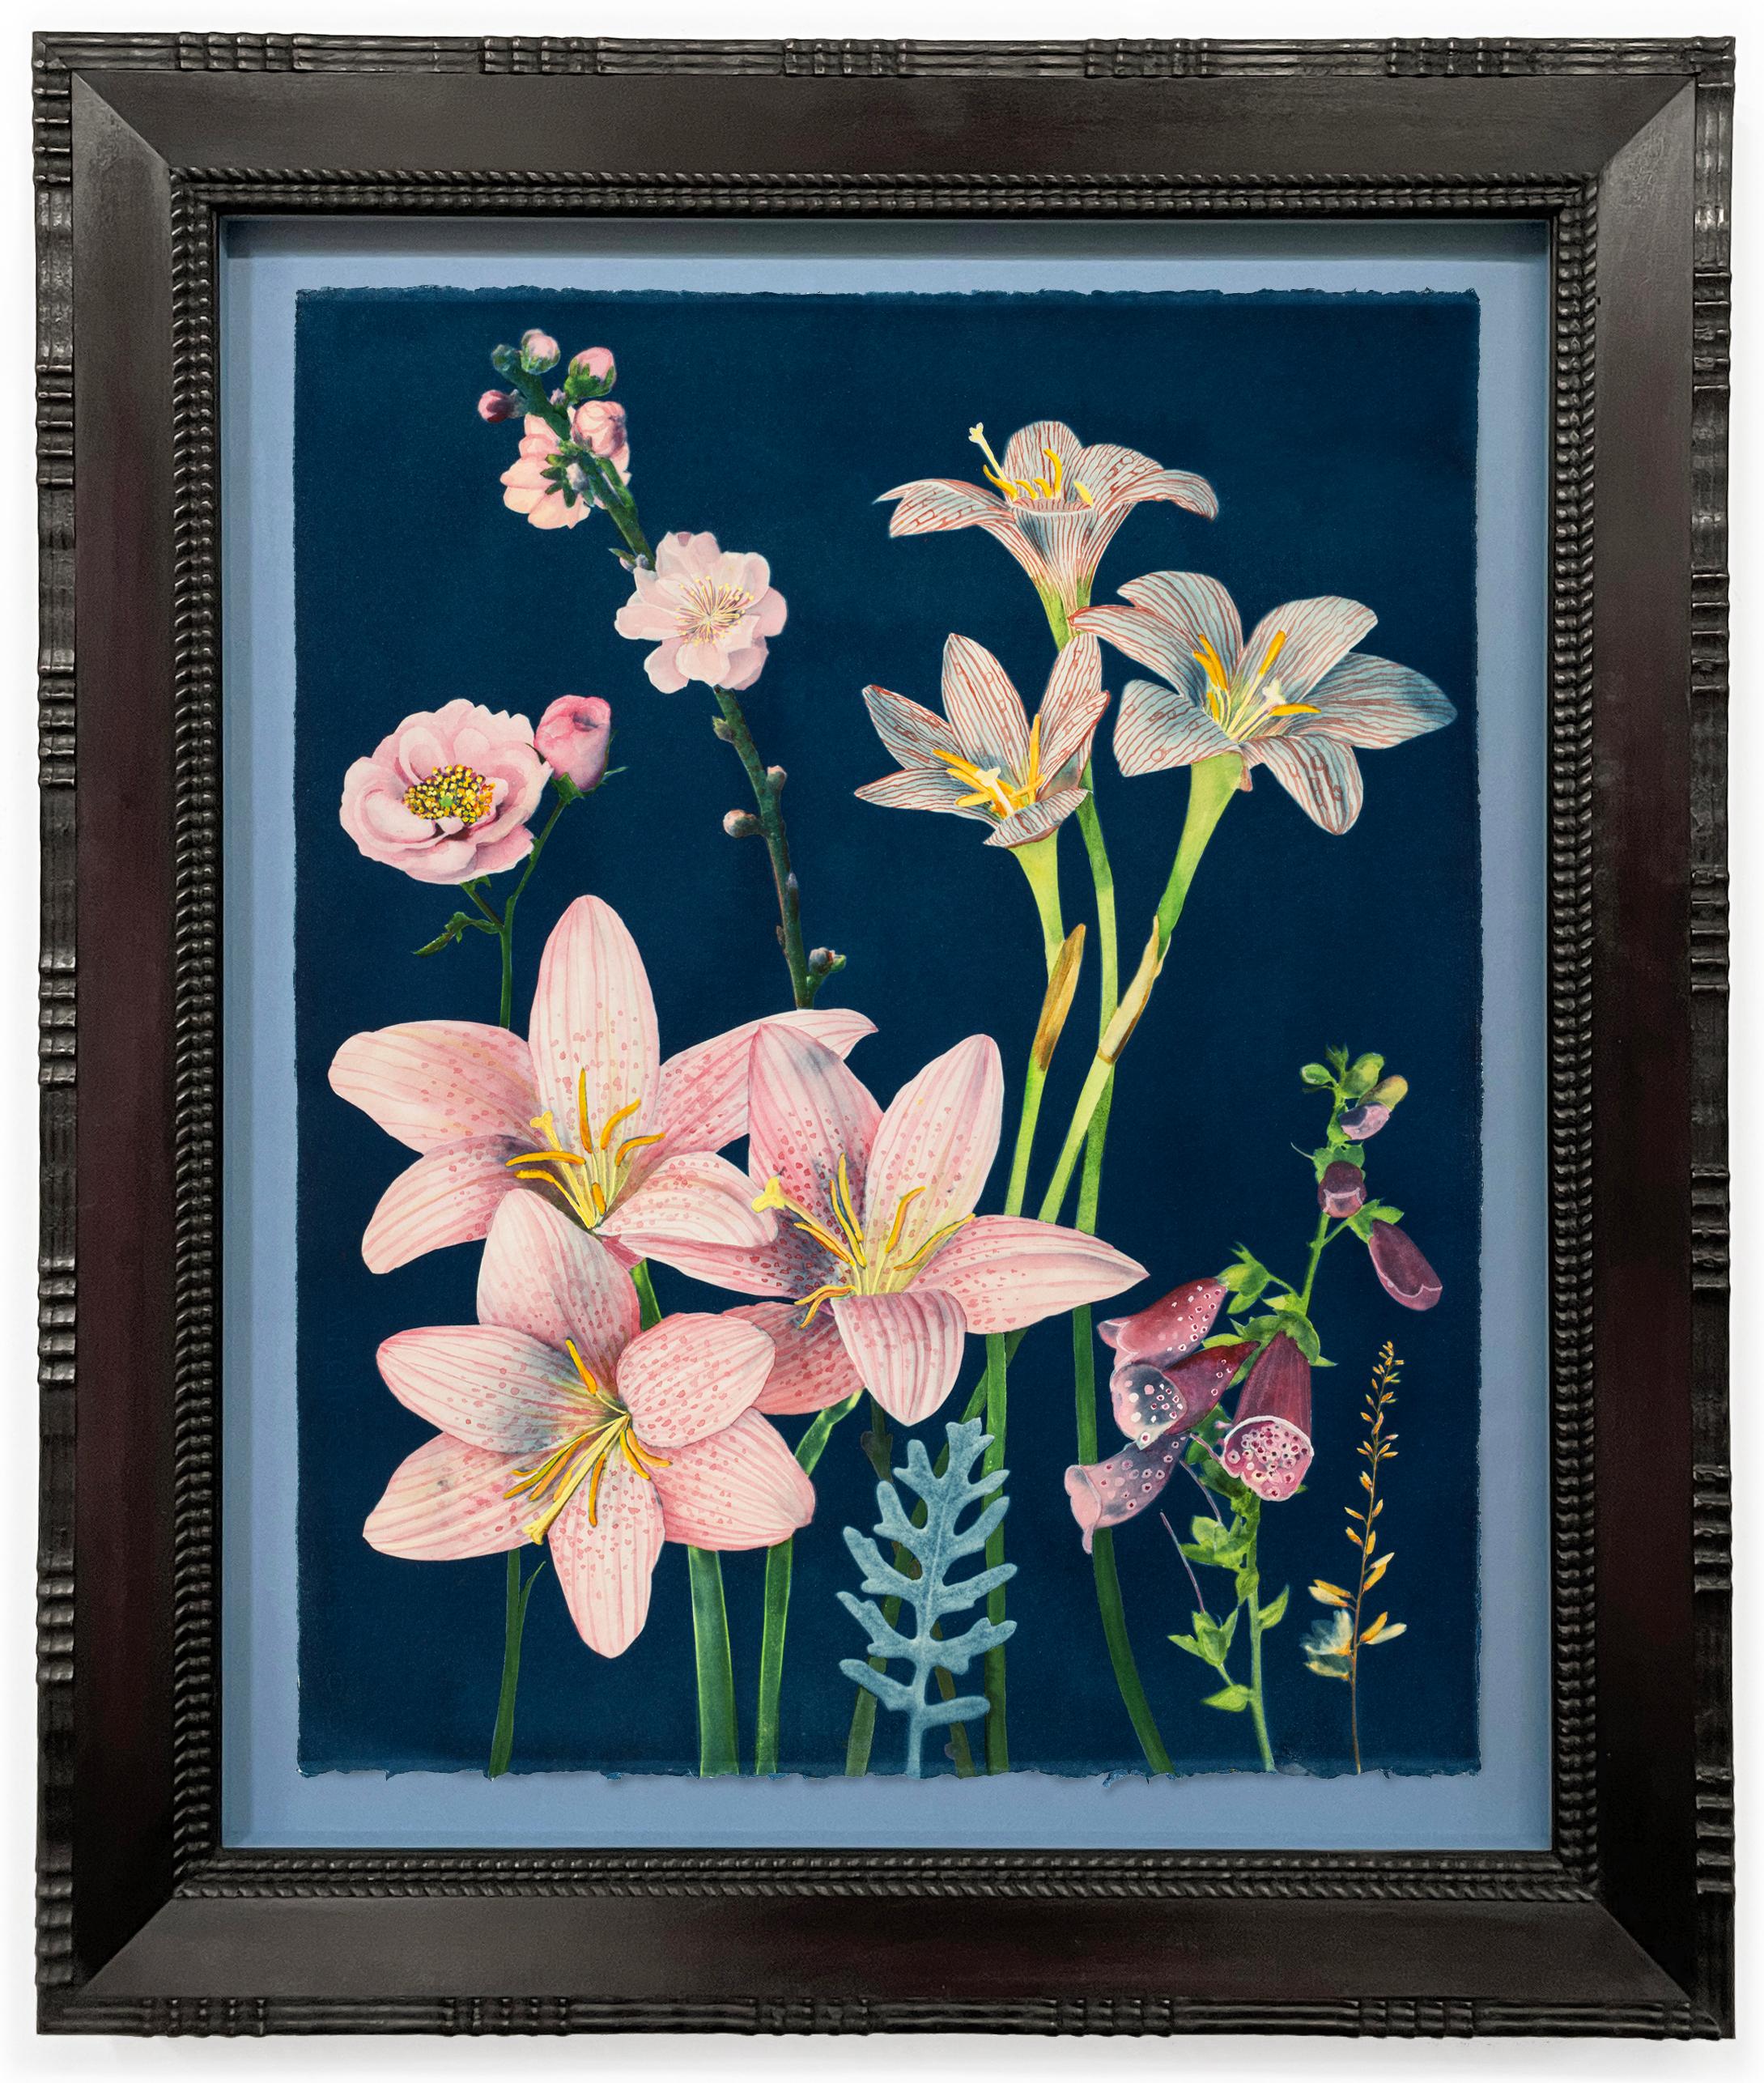 Picturesque Botany (Still Life Painting of Pink Lilies & Roses on Indigo Blue)